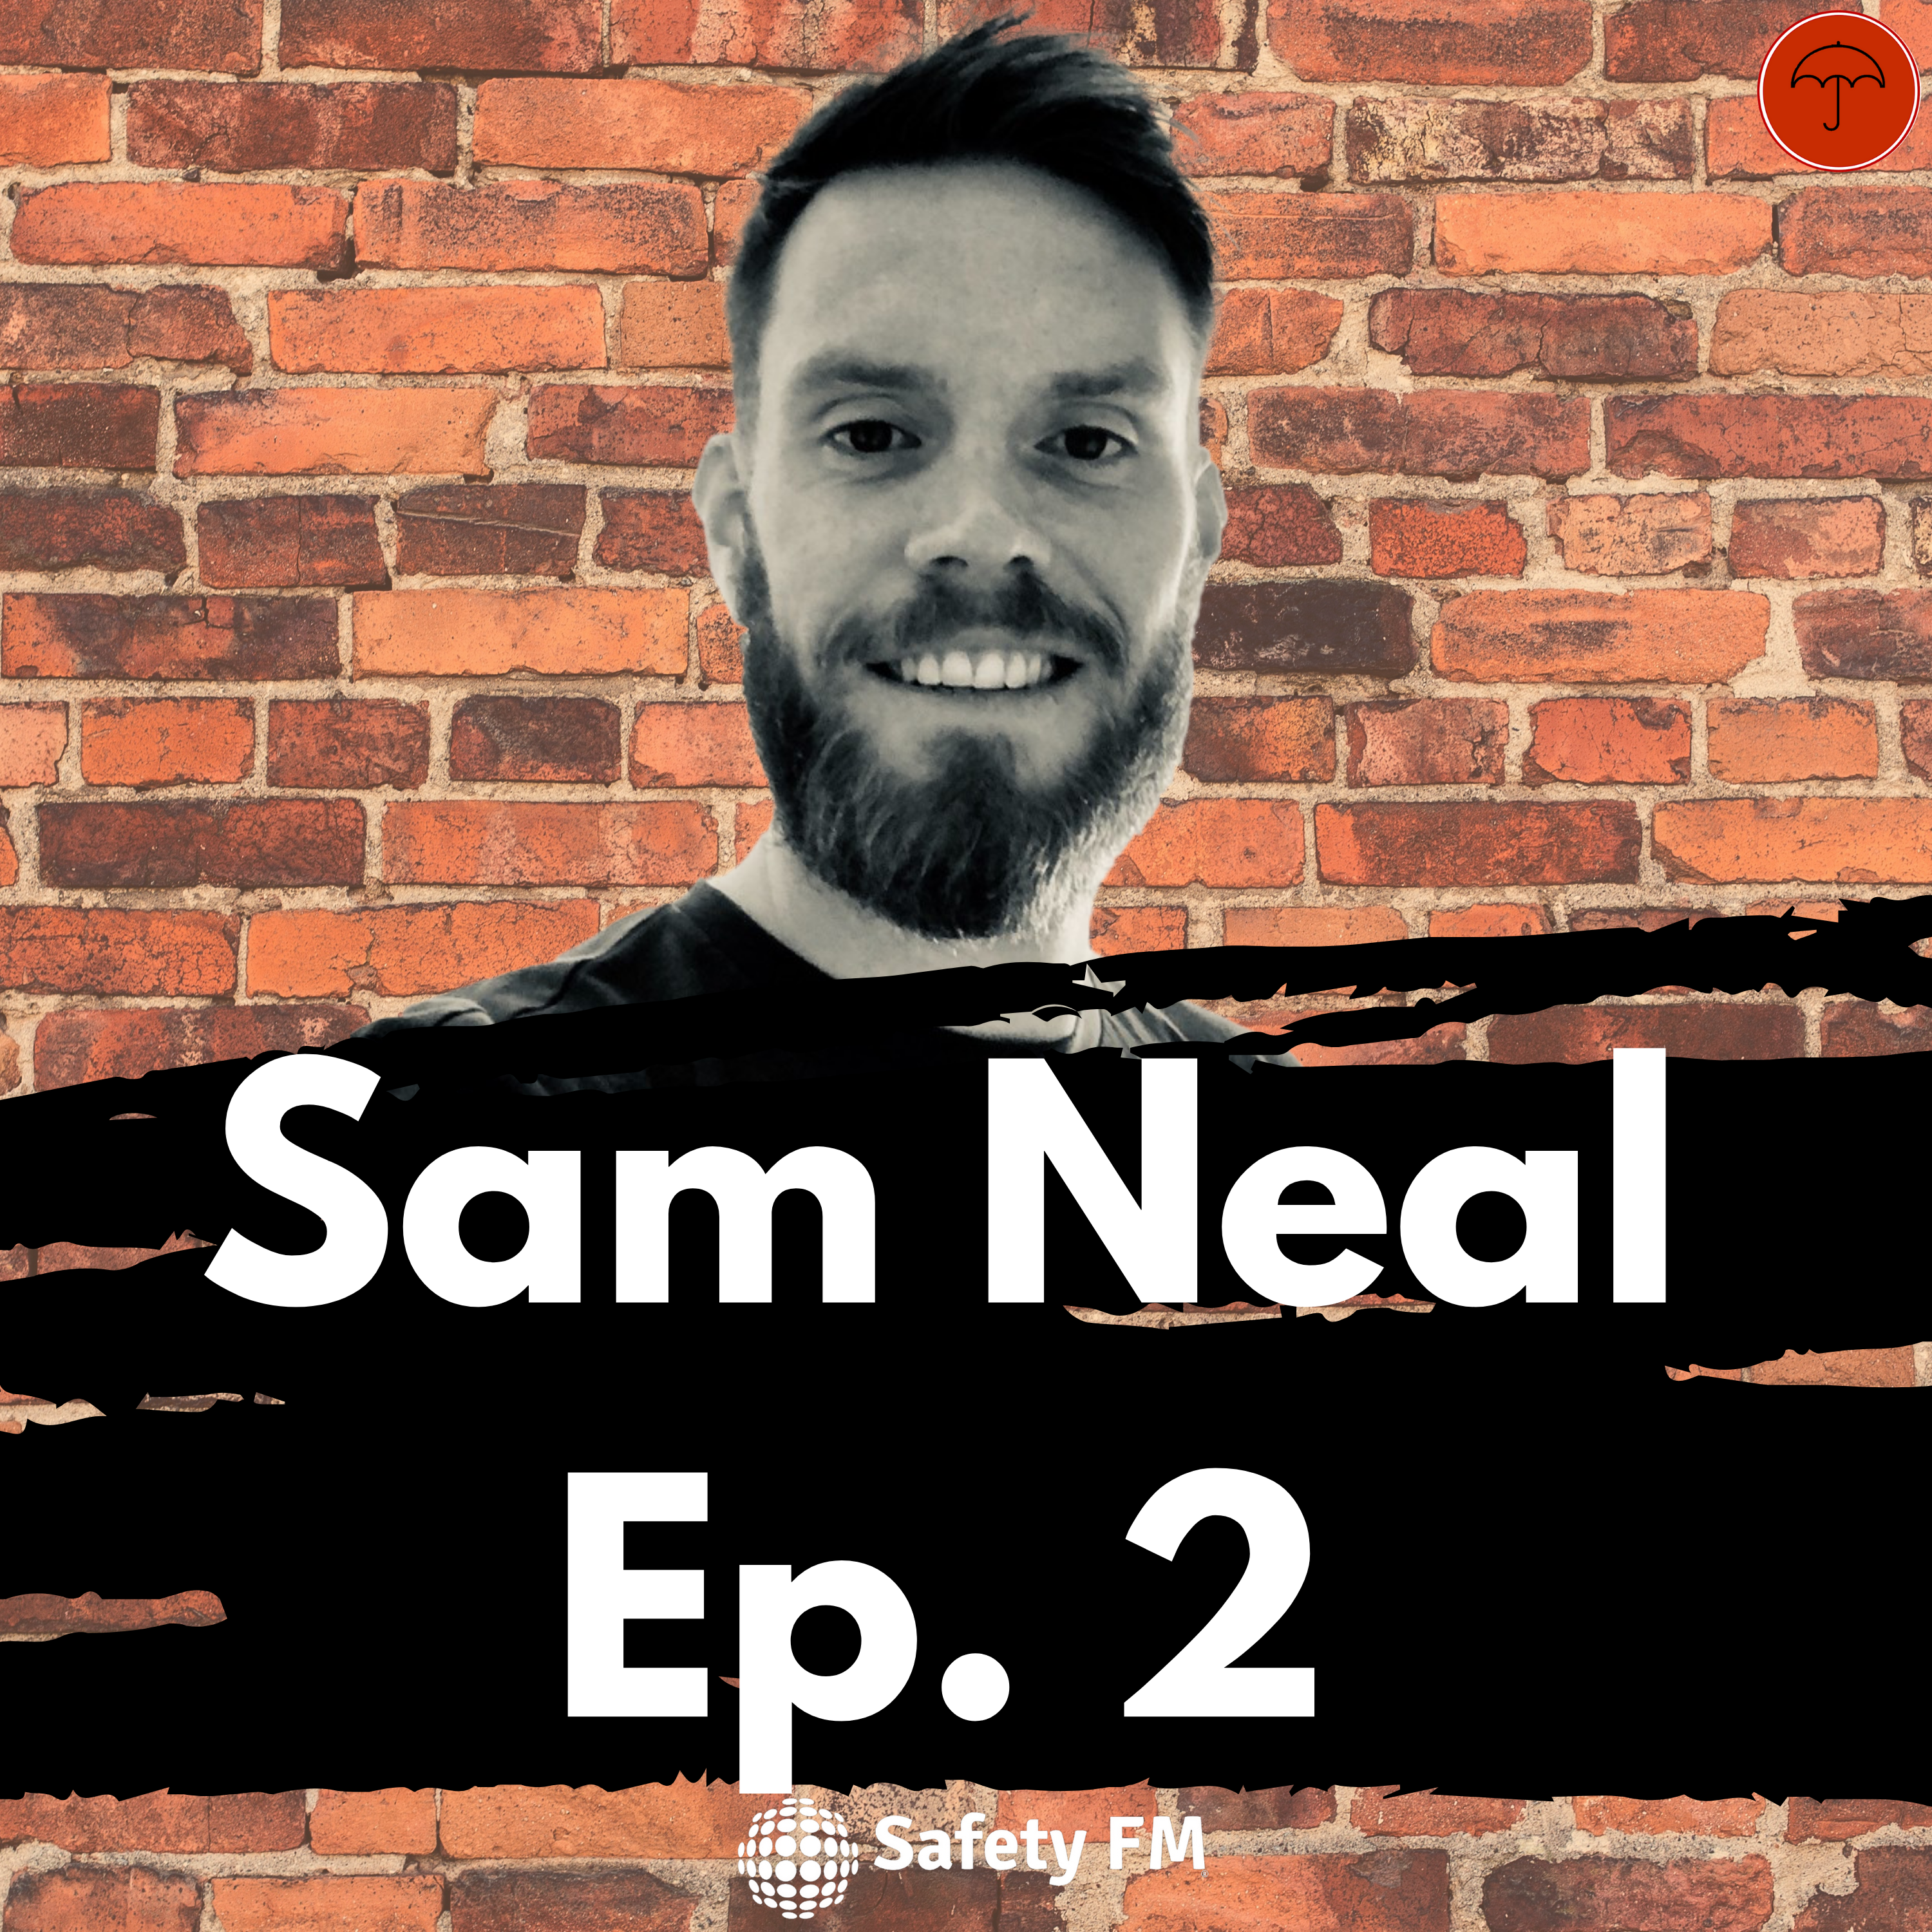 Rebranding Safety with Sam Neal - CoHost for Q2! Episode 2